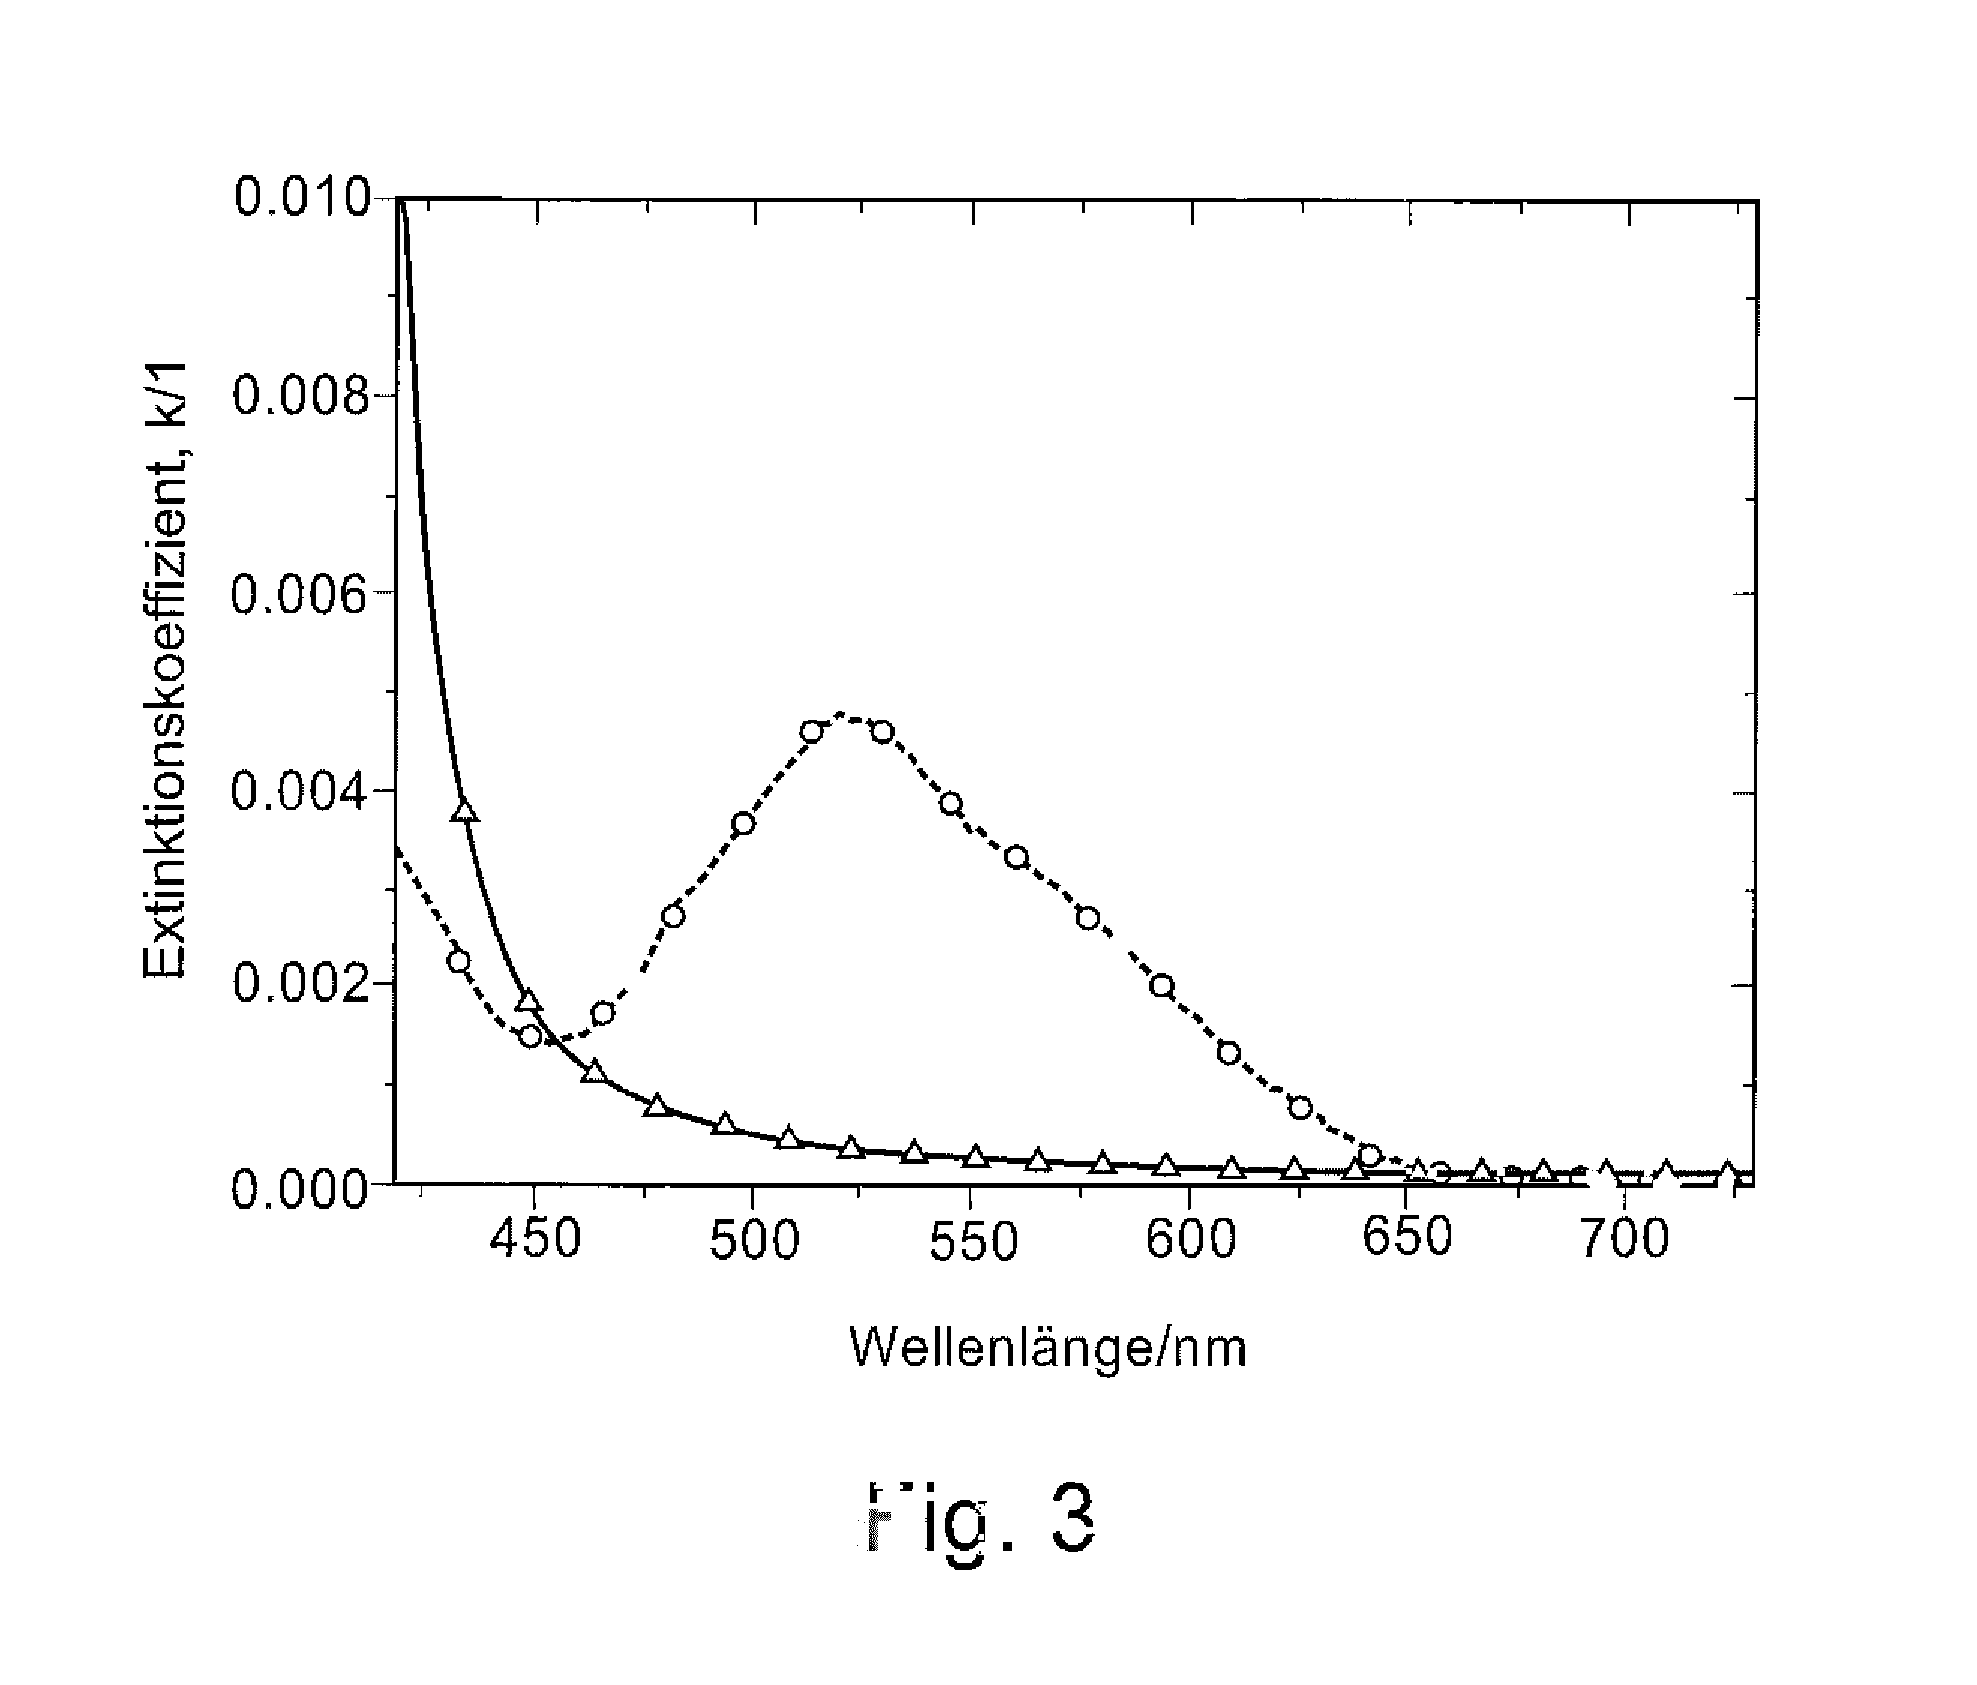 N-Doped Semiconducting Material Comprising Phosphine Oxide Matrix and Metal Dopant